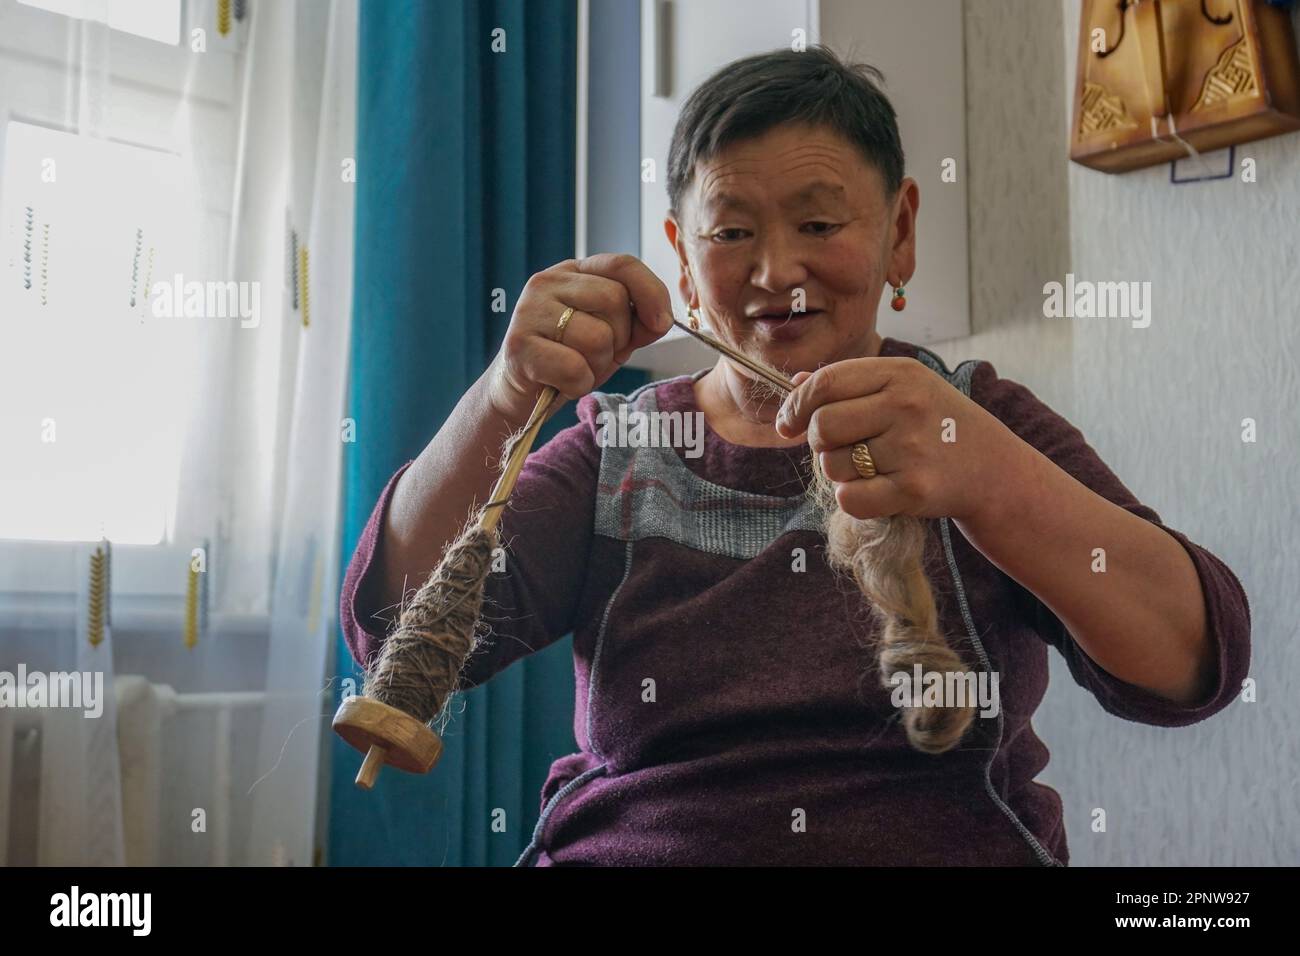 Jargal Khukhkhaltar spins camel wool into yarn in Erdenet, Orkhon province, Mongolia on April 23, 2022. The use of camel fiber, a traditional material since ancient times, has drastically decreased in Mongolia, Jargal says. “Now, there is hardly anybody who spins yarn like this.” (Khorloo Khukhnohoi/Global Press Journal) Stock Photo